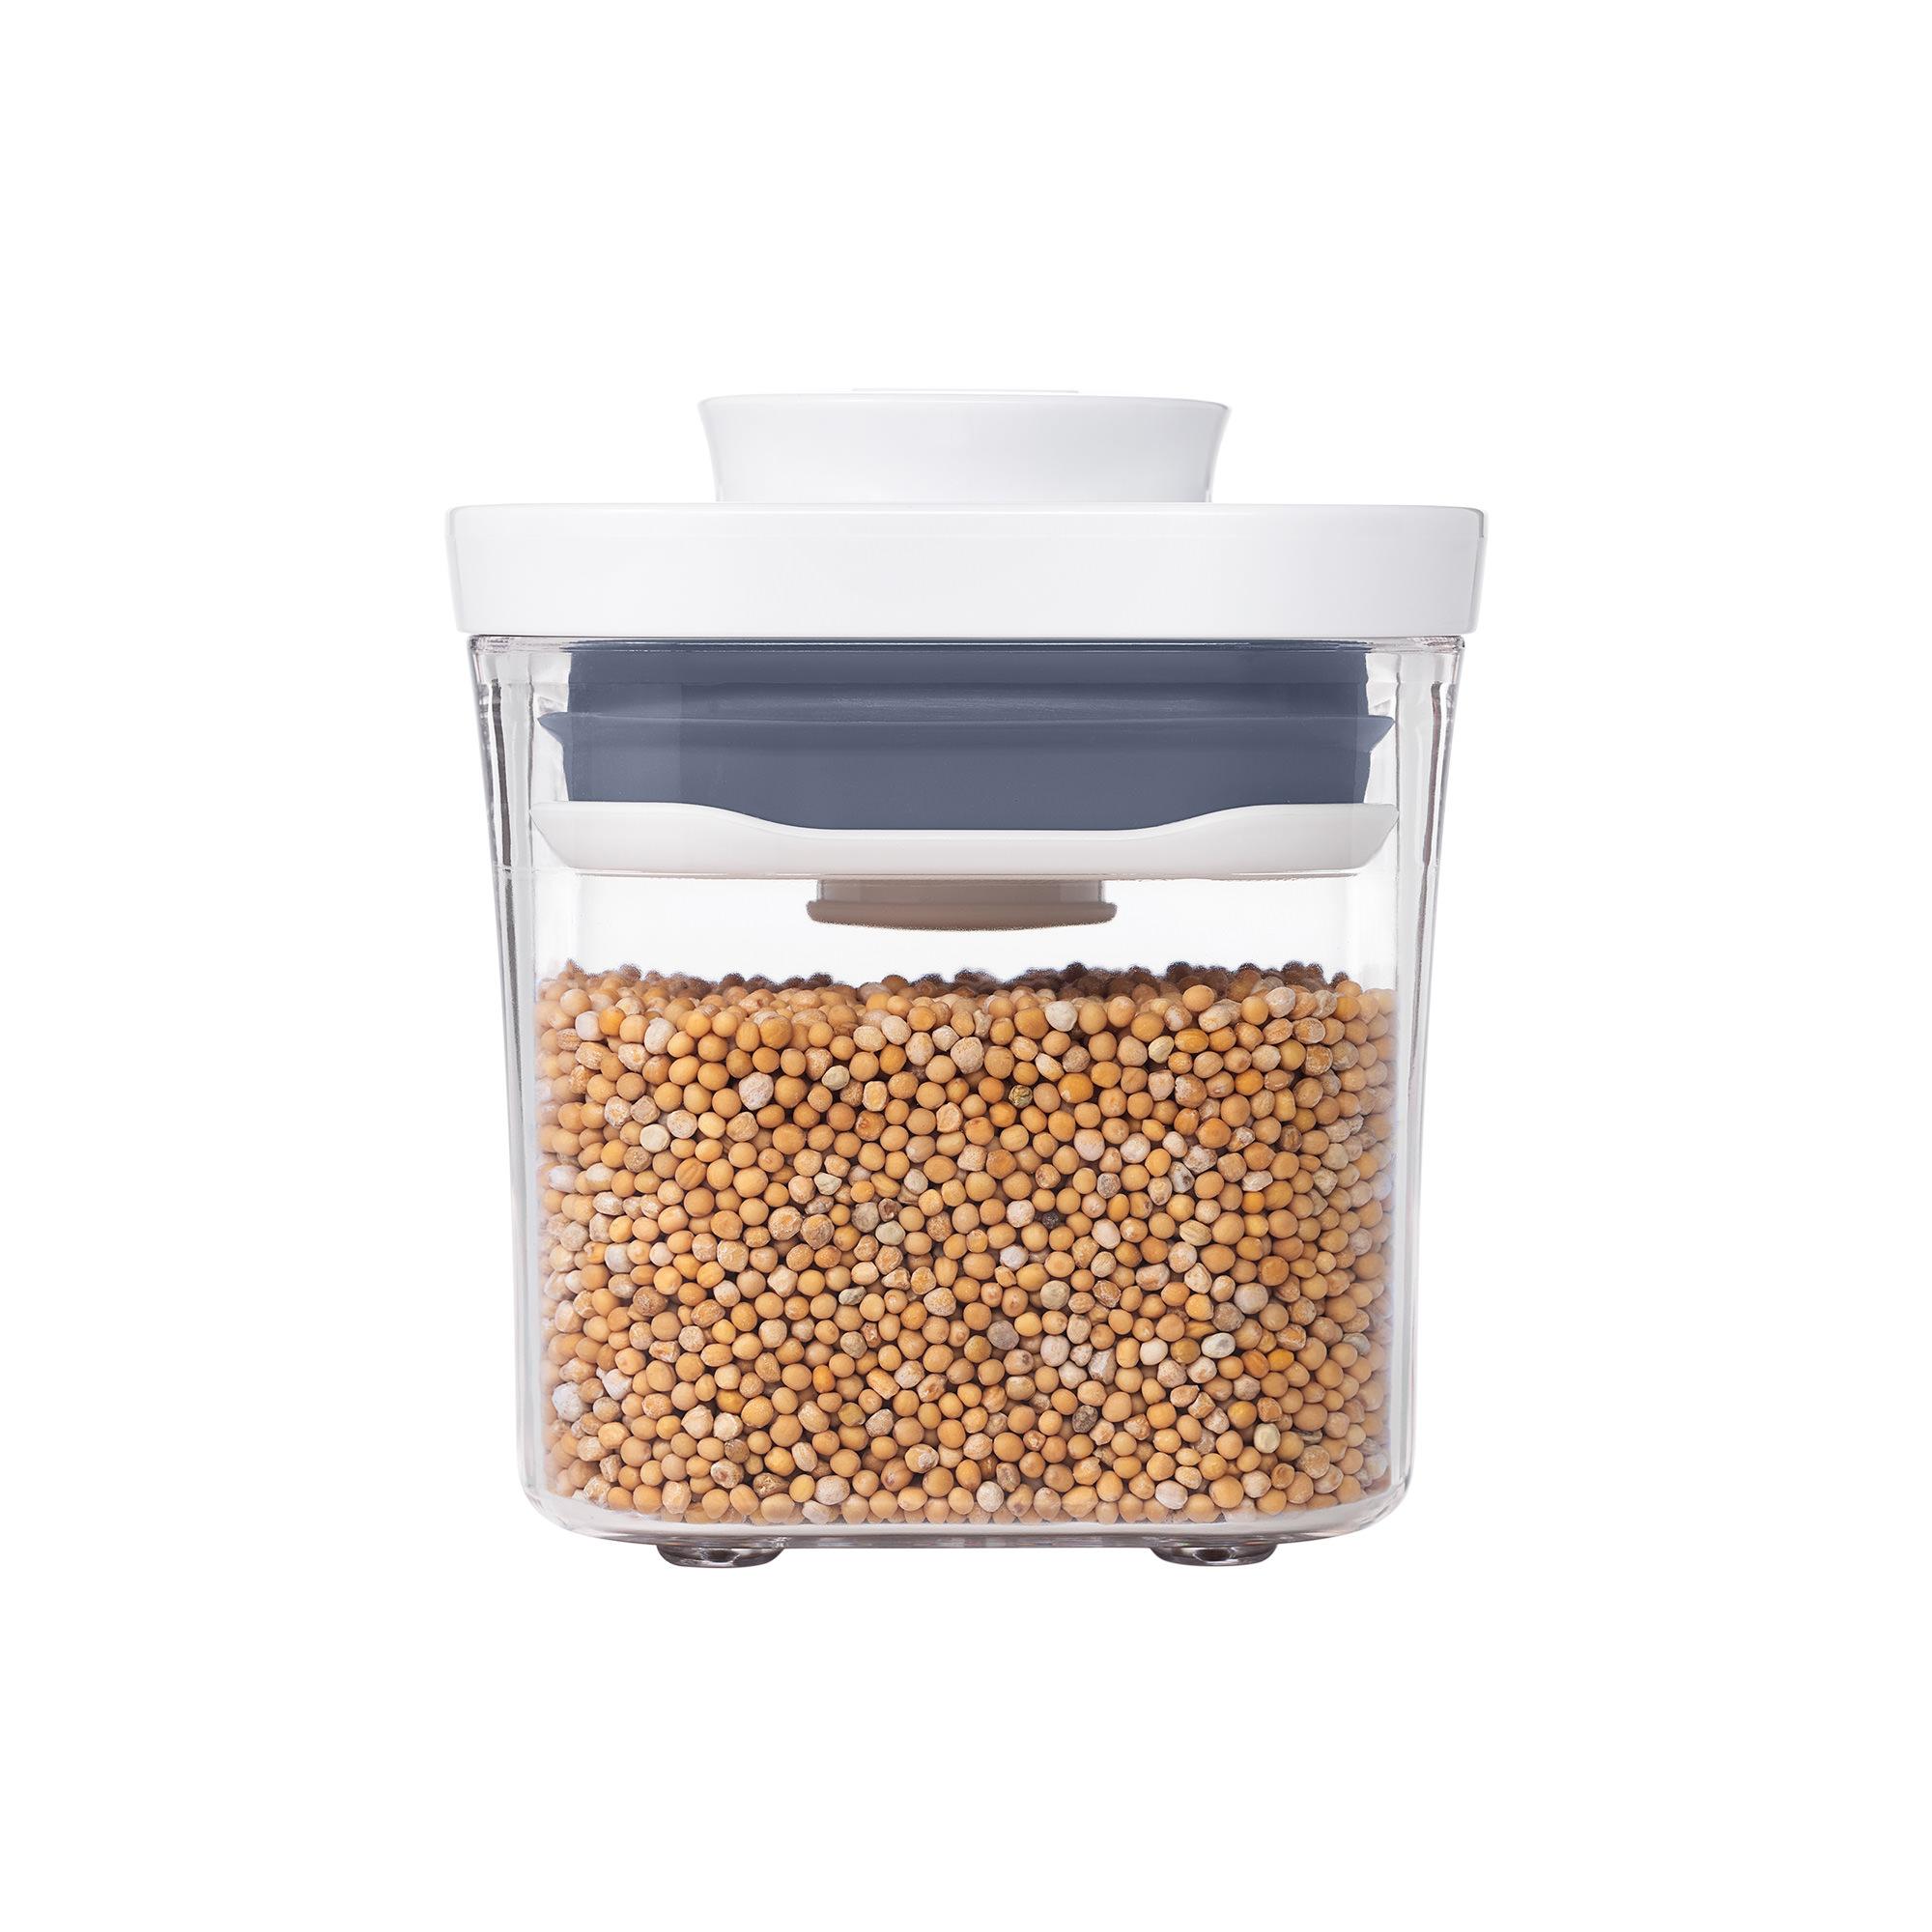 OXO Good Grips Square Pop 2.0 Container 200ml Image 3